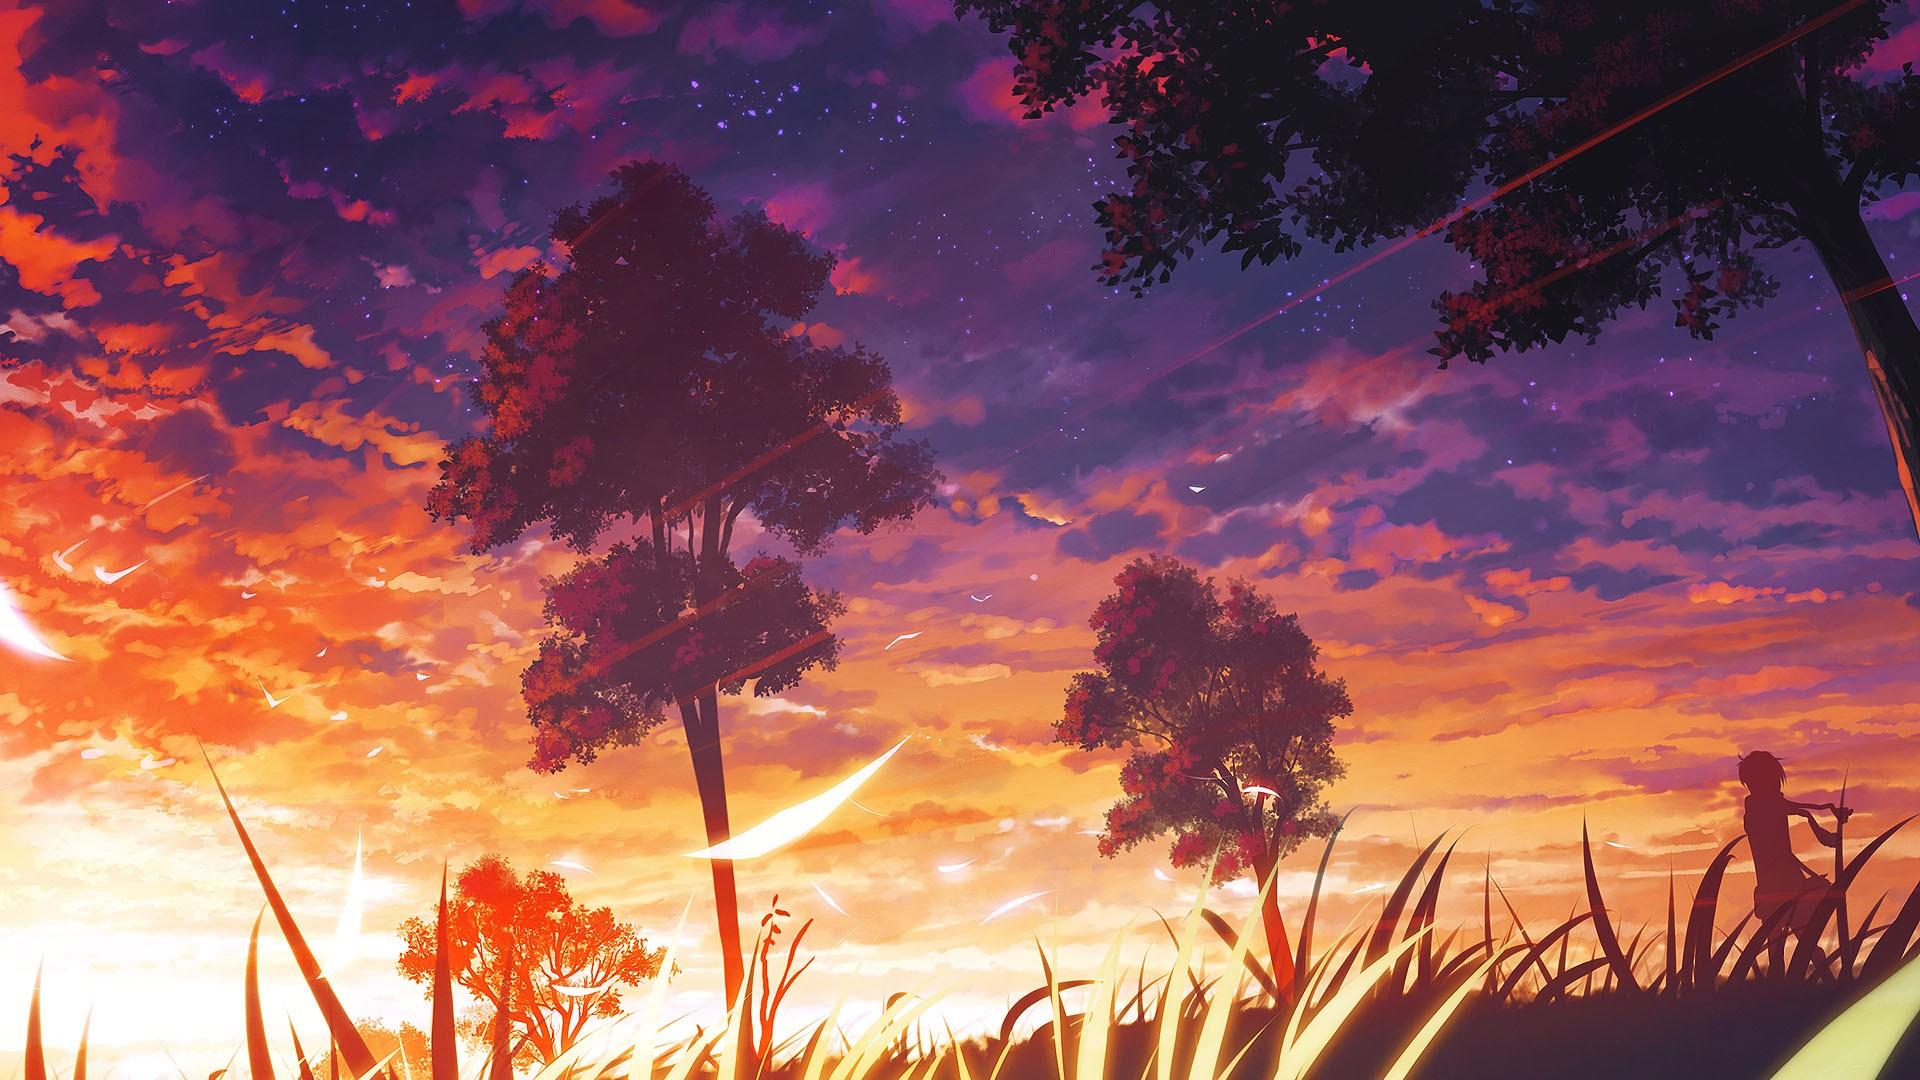 Sky Anime Scenery Wallpapers - Wallpaper Cave